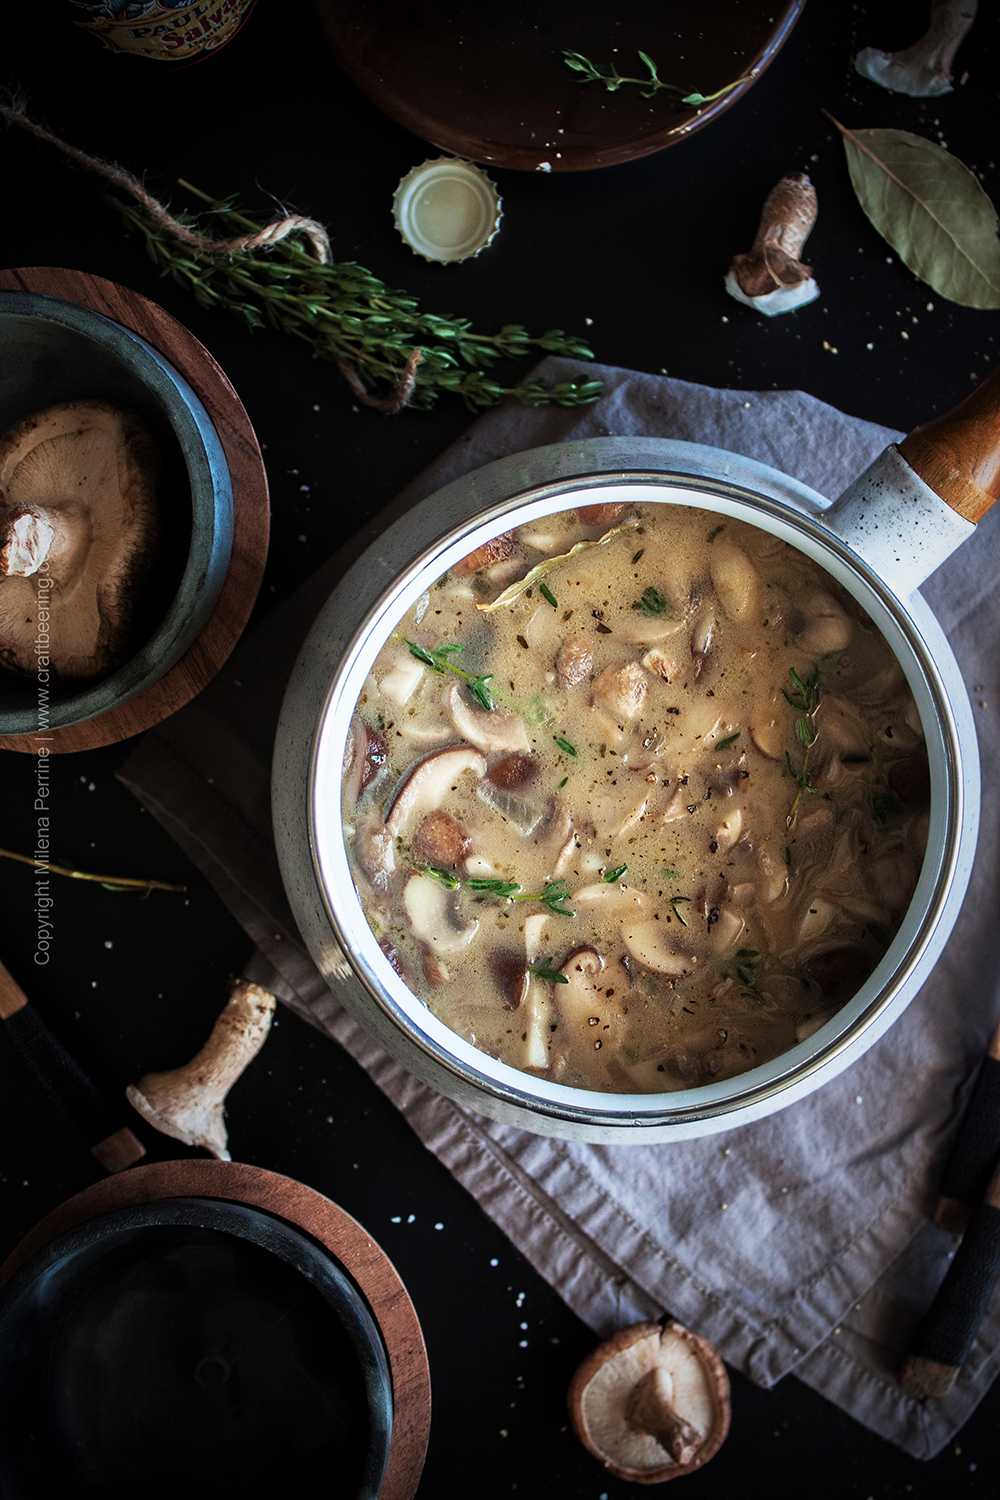 Creamy mushroom soup with doppelbock lager